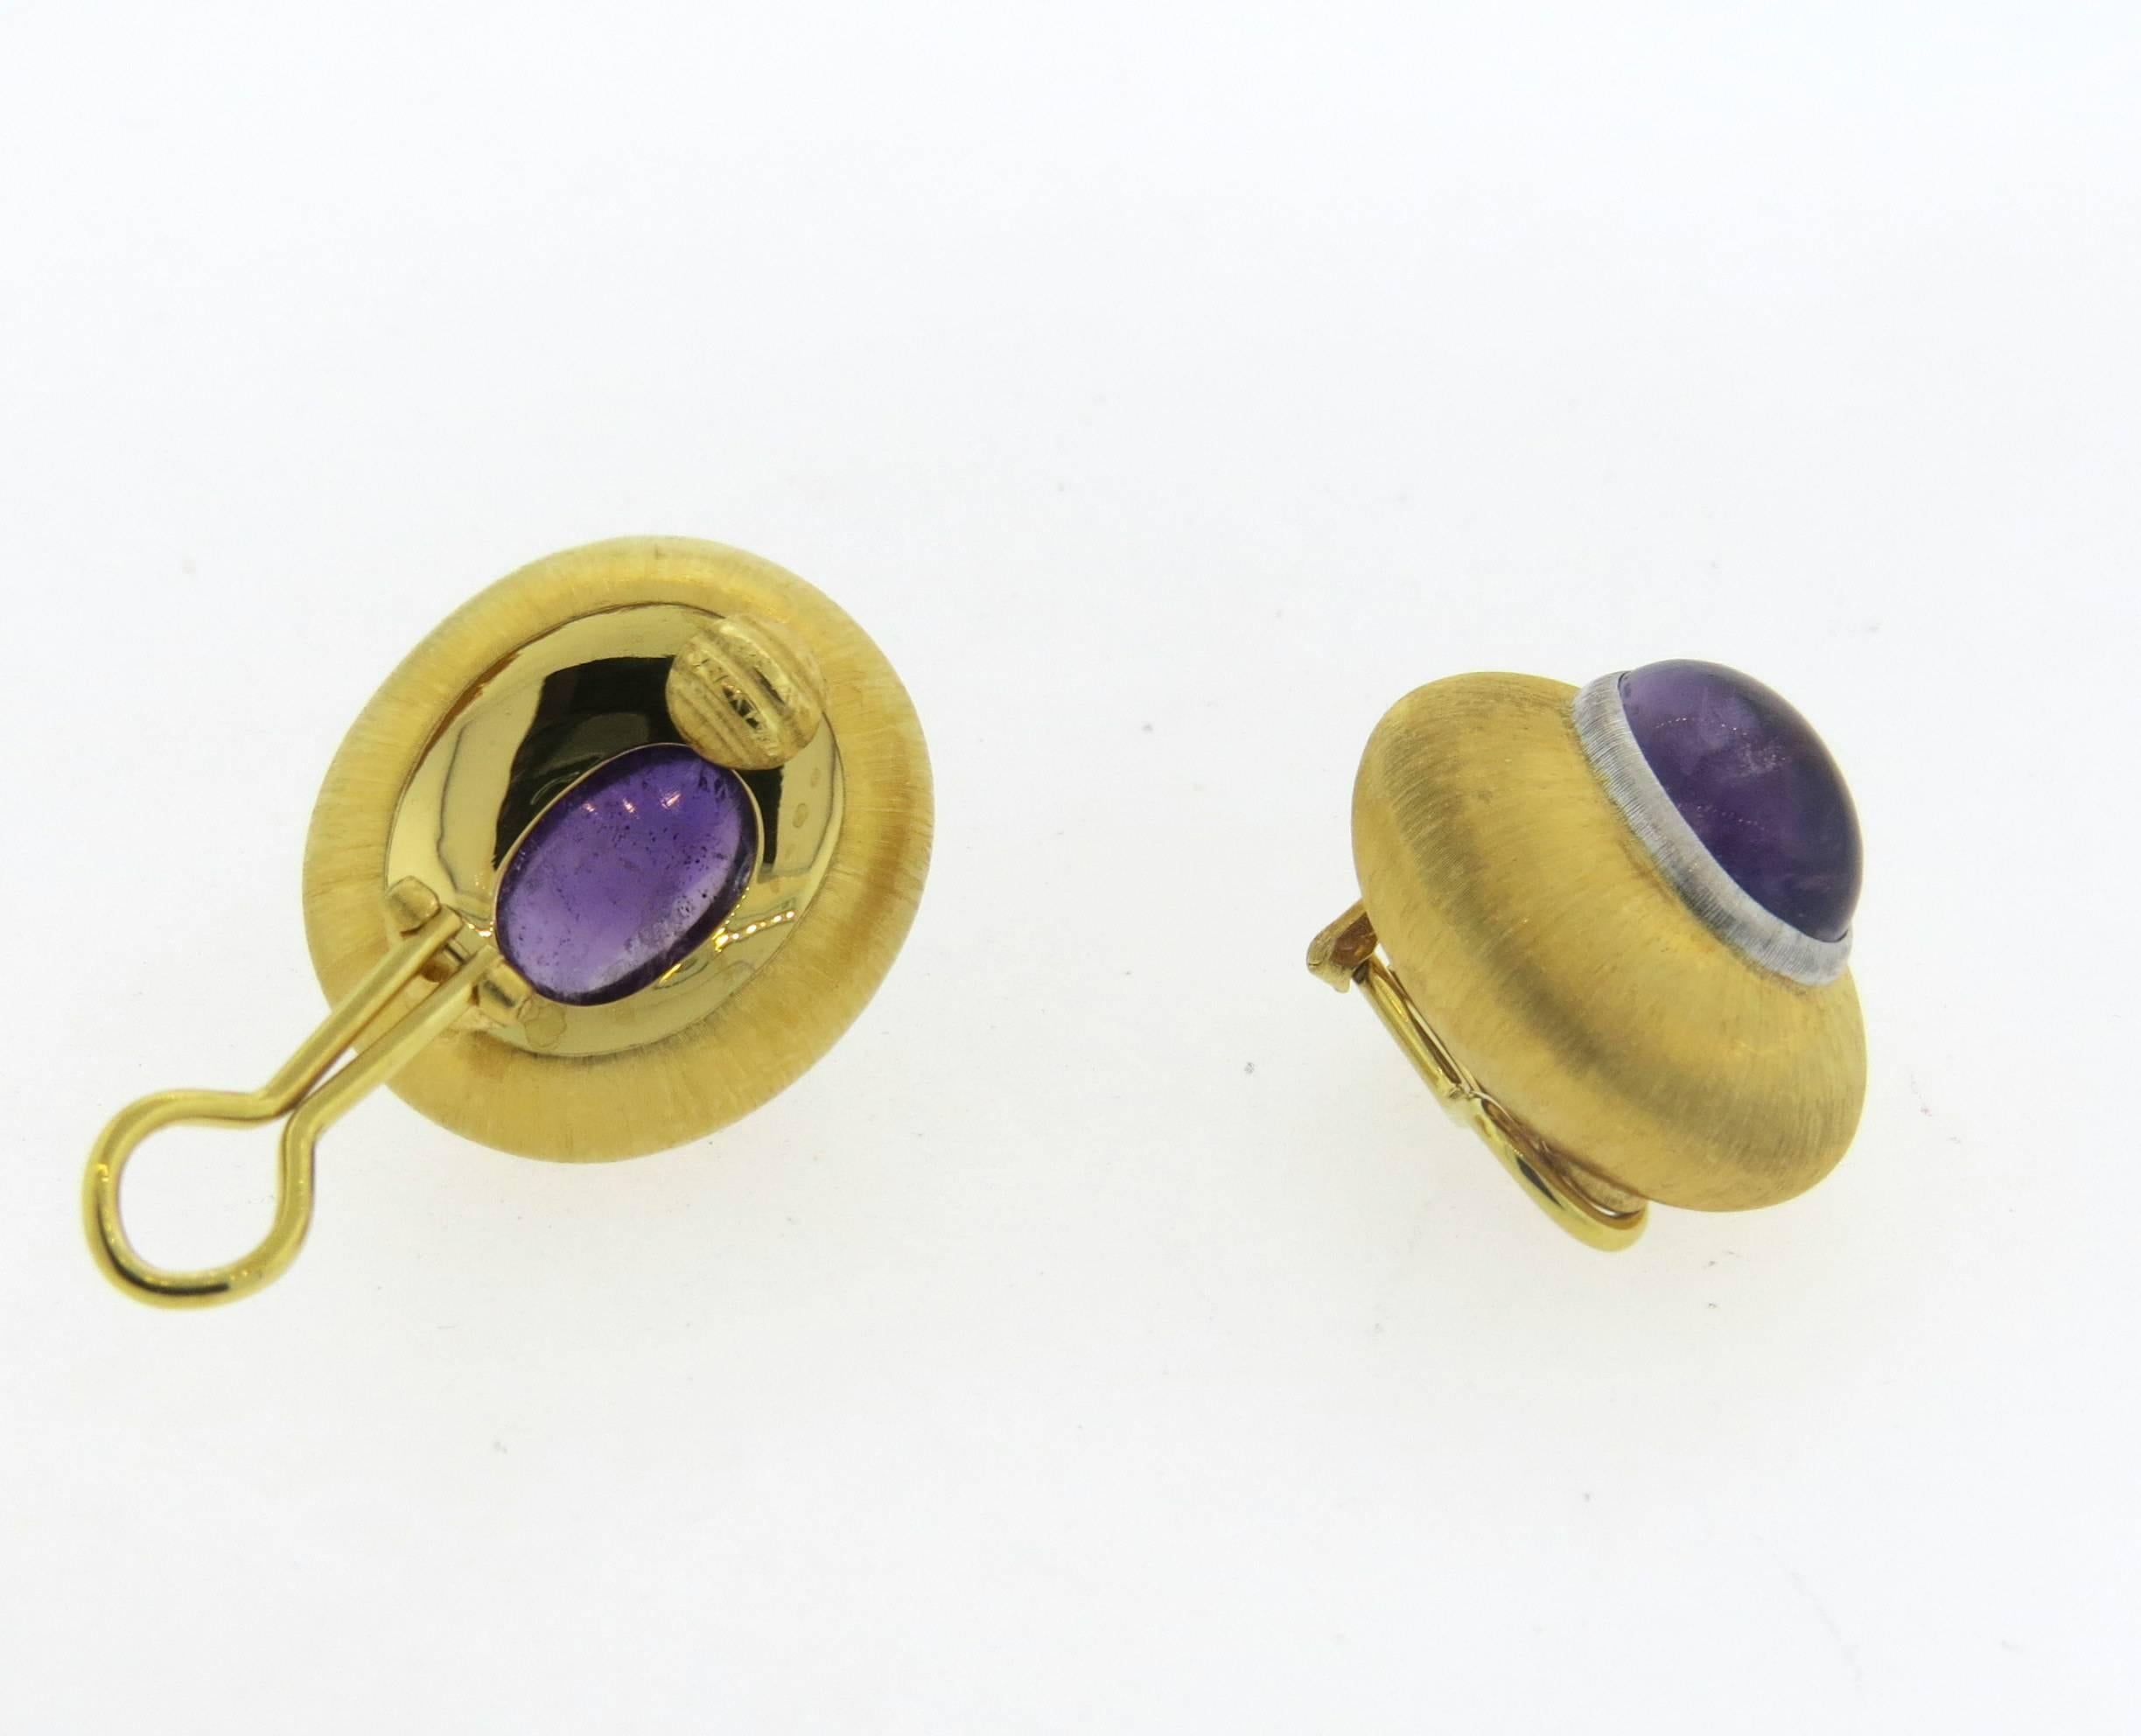 A pair of 18k yellow and white gold large earrings, crafted by Buccellati, set with two amethyst cabochons, weighing 11.28ctw total. Earrings are 24mm x 21mm. Marked: Buccellati Italy 18k. Weight - 19.6 grams
